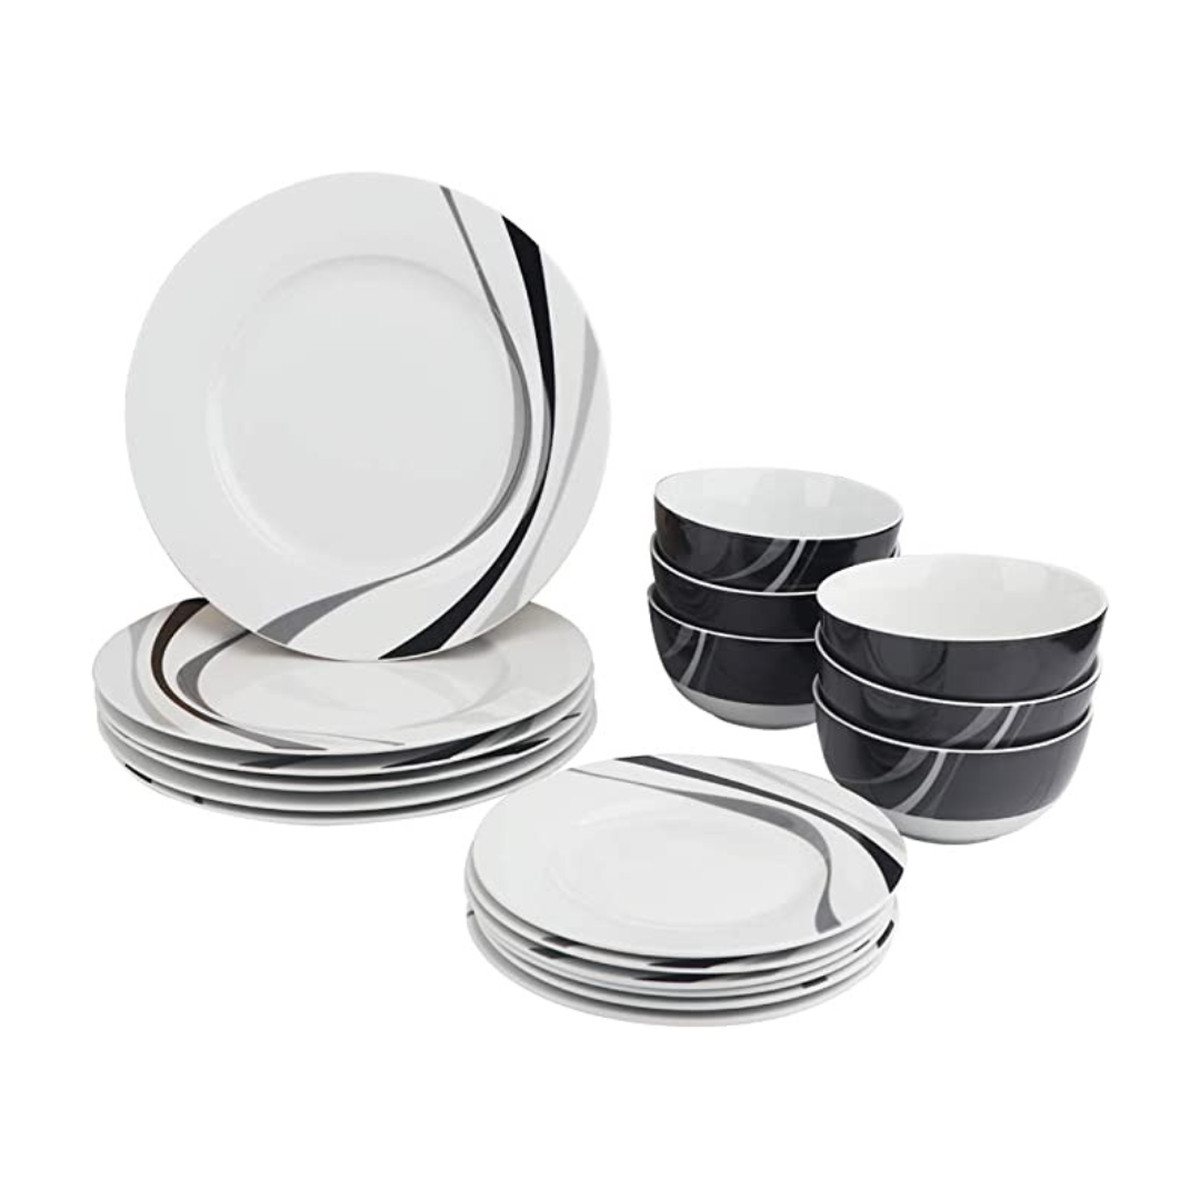 Dinnerware set by Amazon Basics in a swirled gray and white pattern.